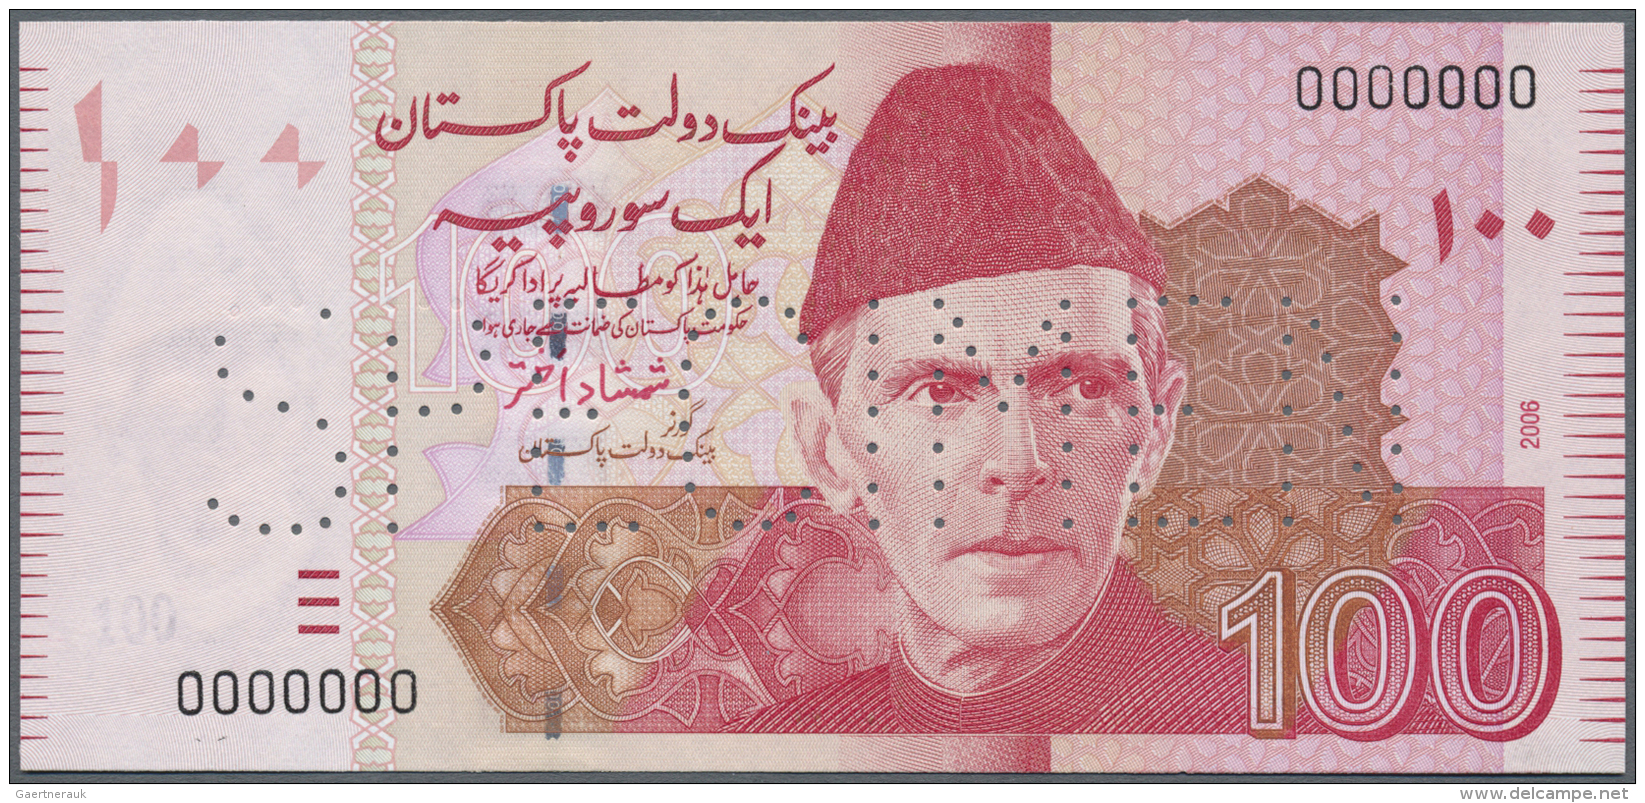 Pakistan: 100 Rupees ND Specimen P. 48as With Specimen Perforation, Zero Serial Numbers, In Condition: UNC. - Pakistan